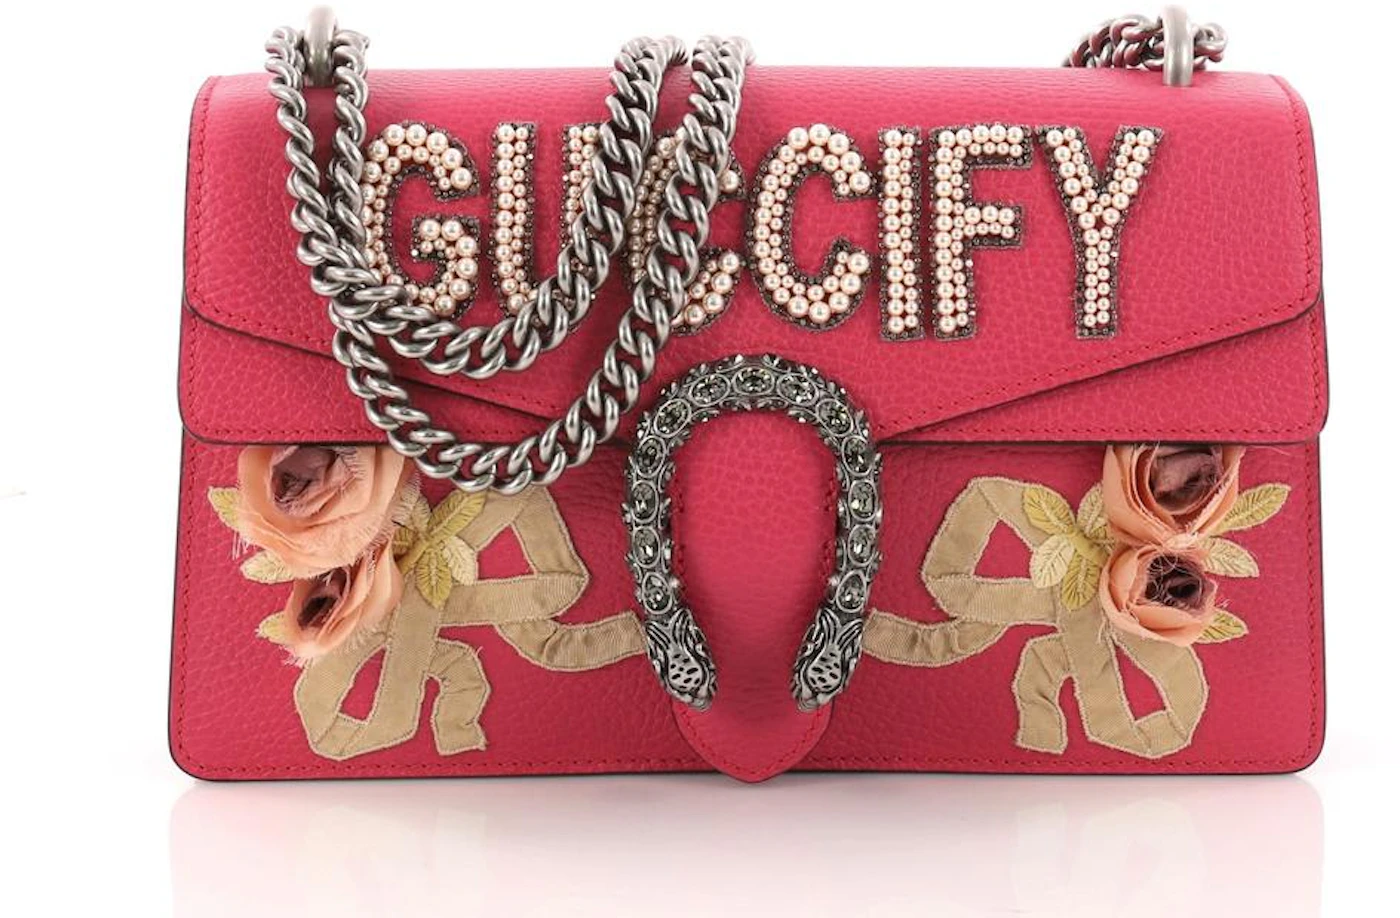 Gucci Dionysus Small Leather Shoulder Bag in Pink